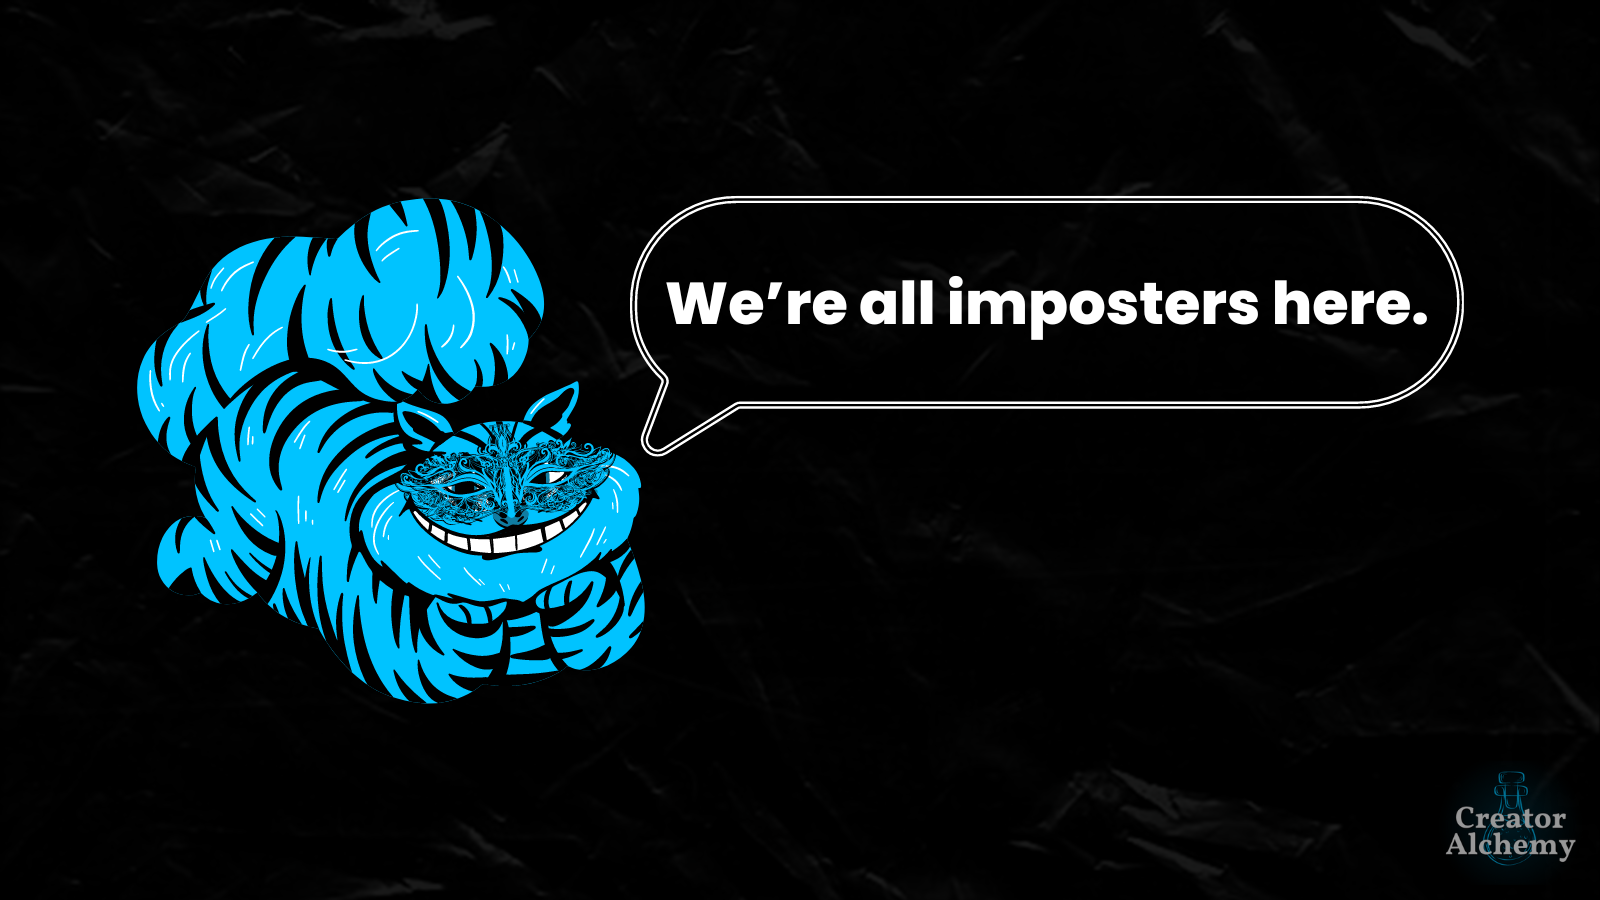 Image of cheshire cat saying "We're all imposters here."